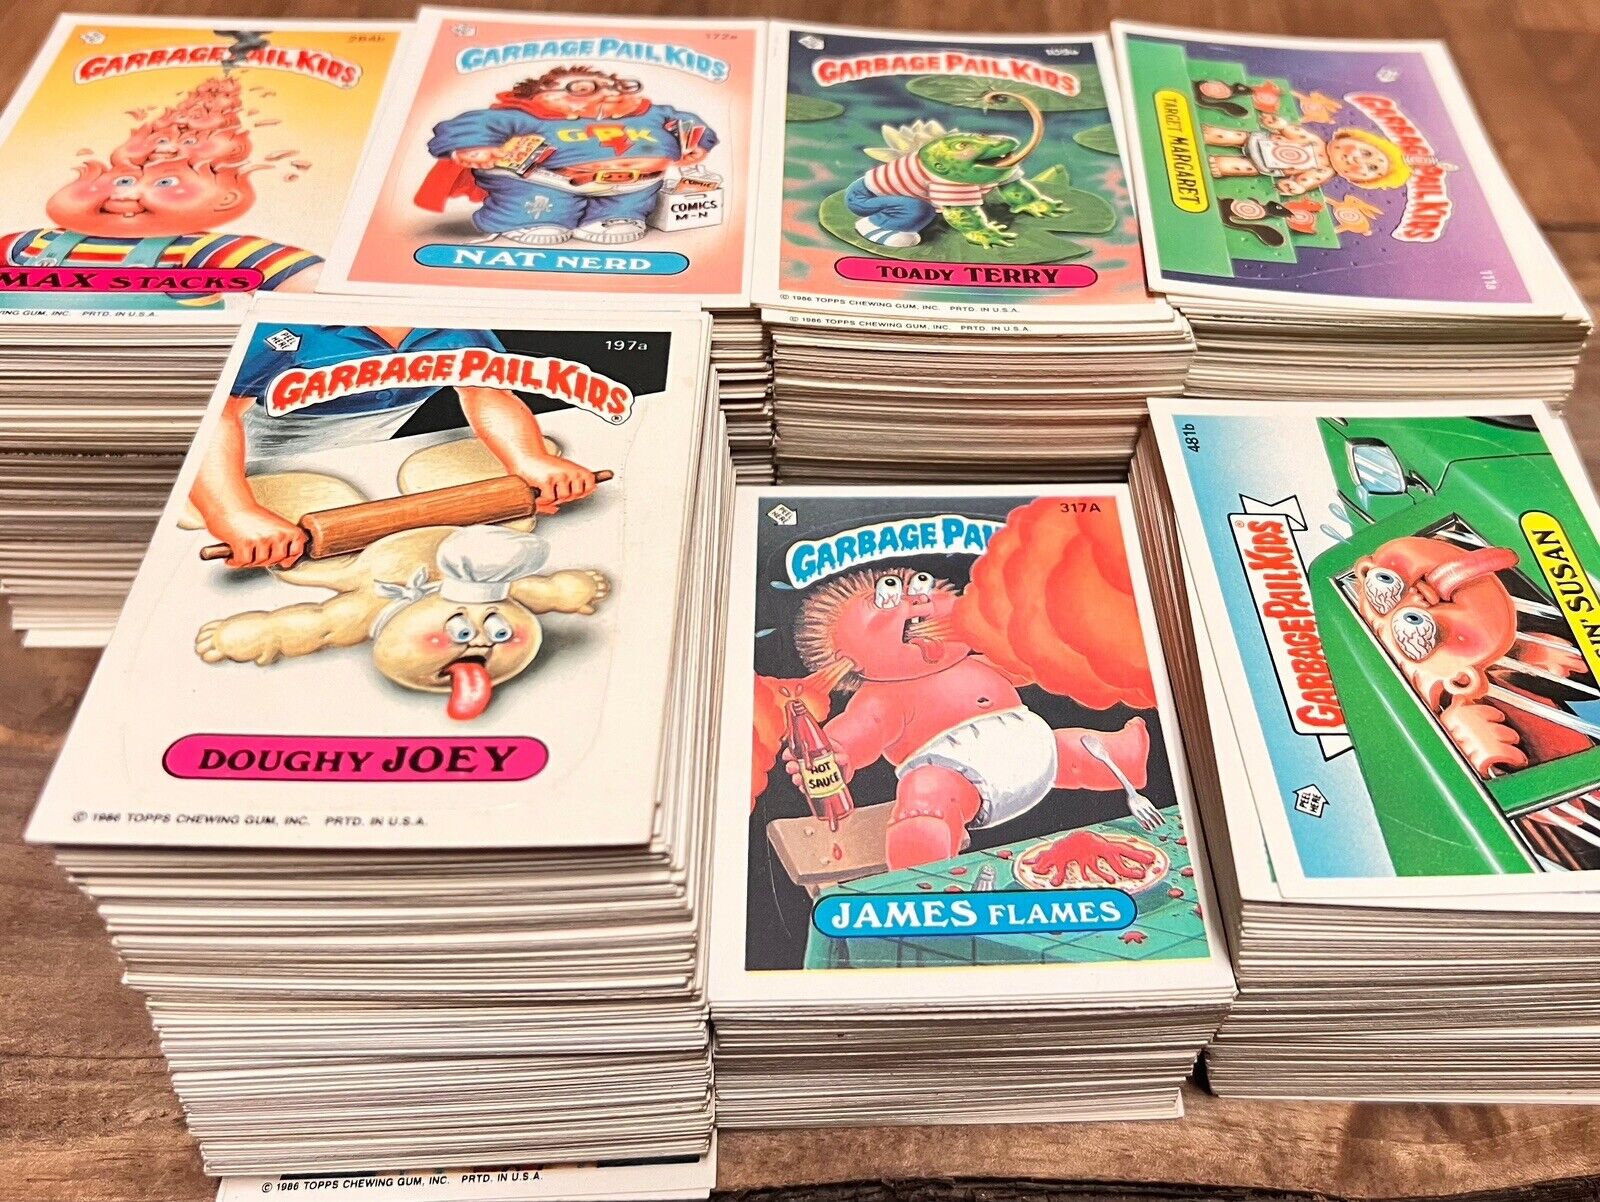 Lot of 1,150 80’s Garbage Pail Kids Series 3 through 14 - All Cards Are NM/MINT